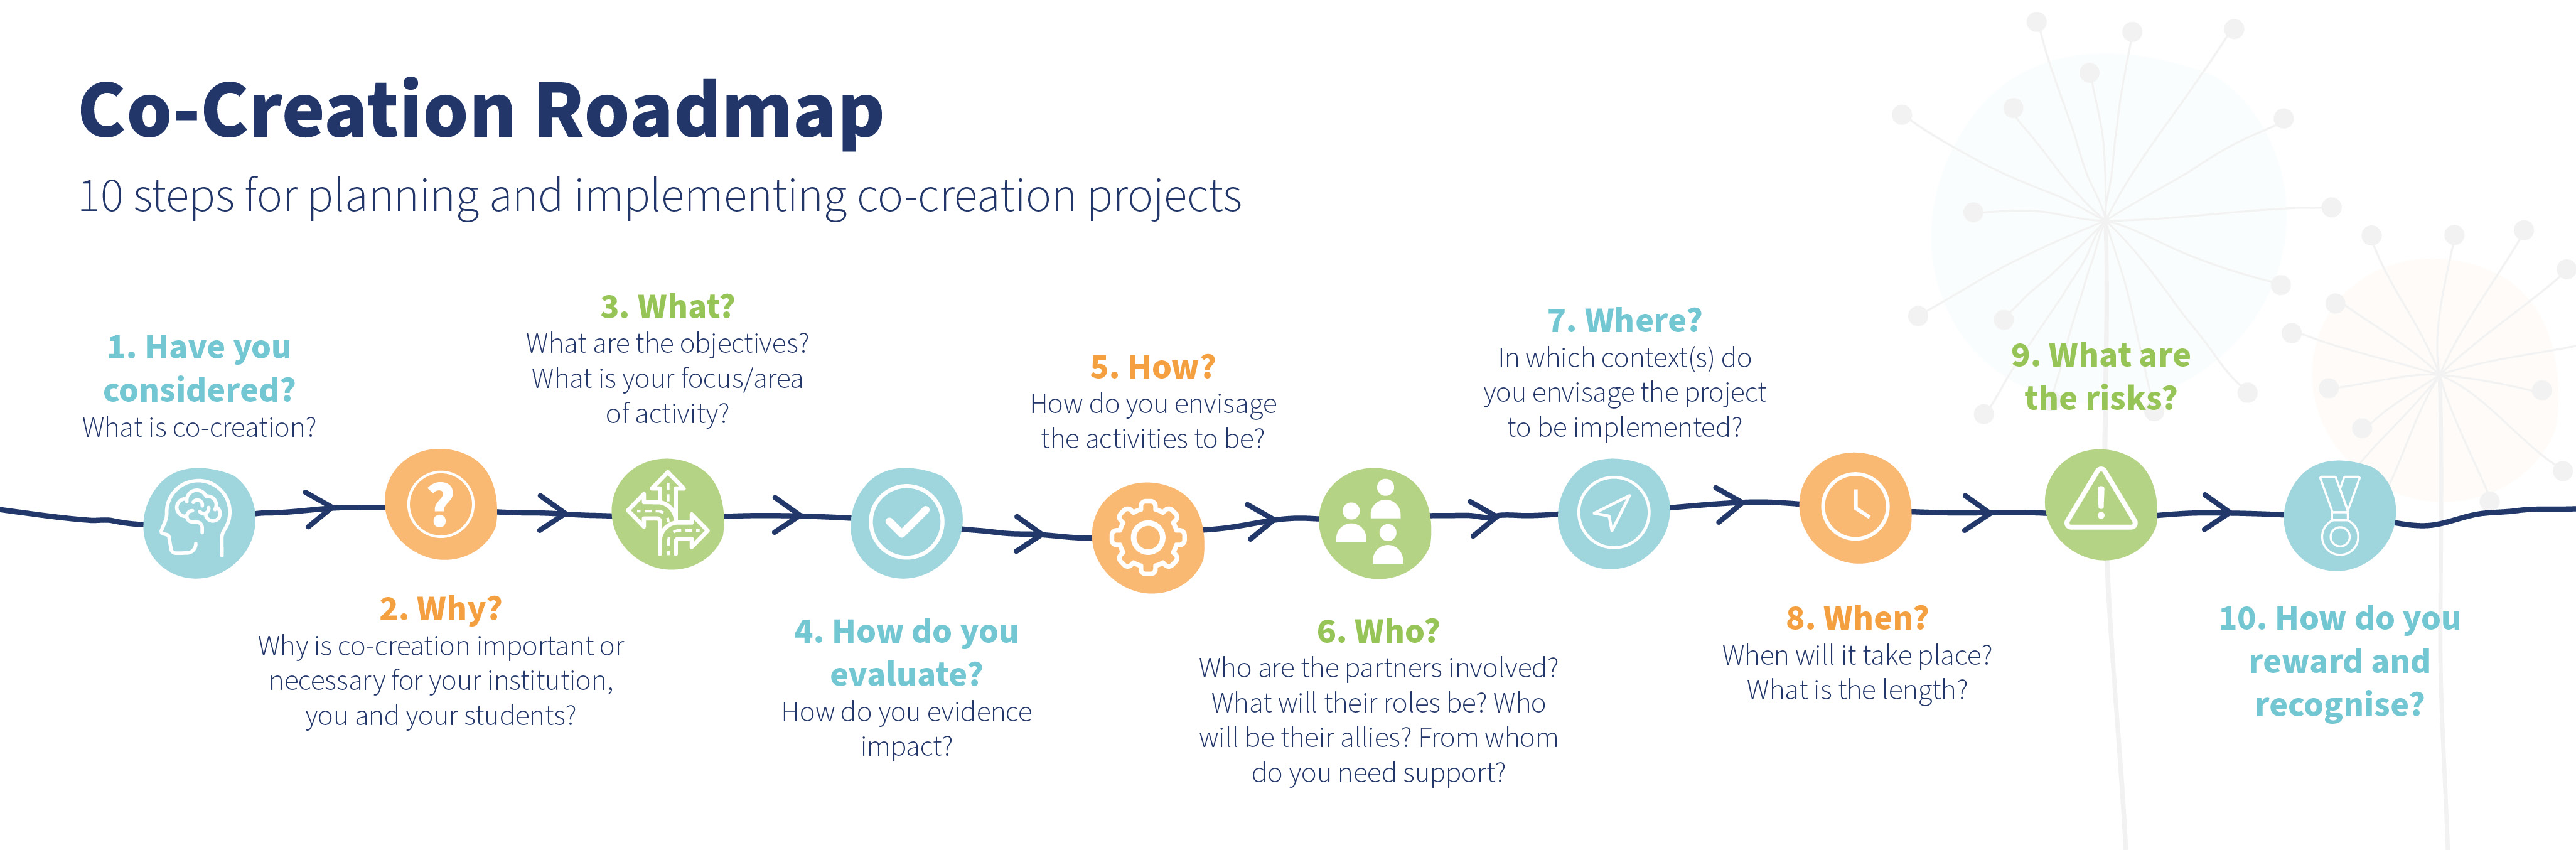 Co- Creation Roadmap. 10 steps for planning and implementing co-creation projects. 1. Have you considered? What is co-creation, 2. Why? Why is co-creation important or necessary for your institution, you and your students? 3. What? What are the objectives? What is your focus/area of activity?, 4. How do you evaluate? How do you evidence impact?, 5. How? How do you envisage the activities to be?, 6. Who? Who are the partners involved? What will their roles be? Who will be their allies? From whom do you need support?, 7. Where? In which context(s) do you envisage the project to be implemented?, 8. When? When will it take place? What is the length?, 9. What are the risks?, 10. How do you reward and recognise?